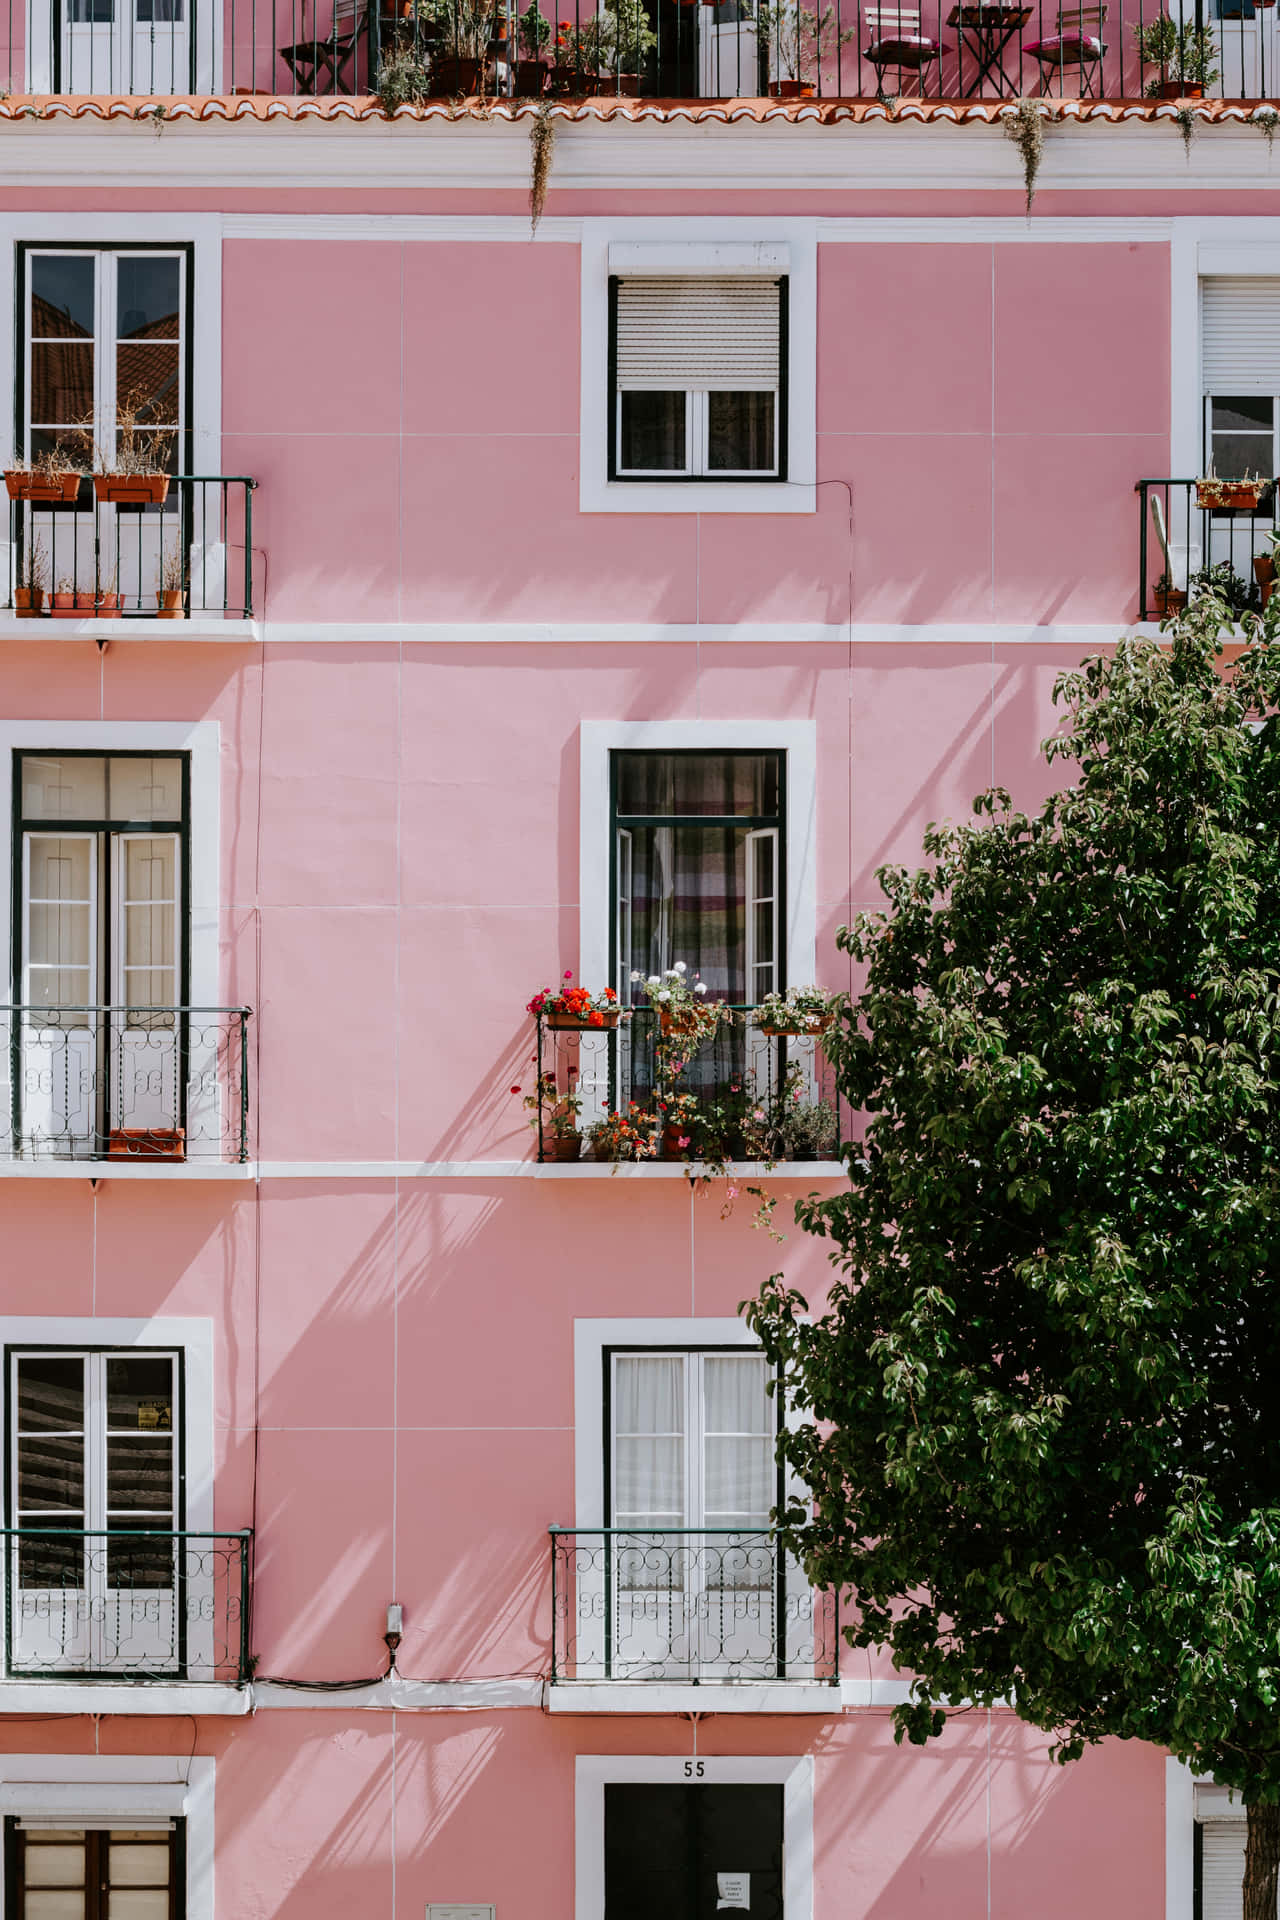 A Pink Building With Balconies And A Tree